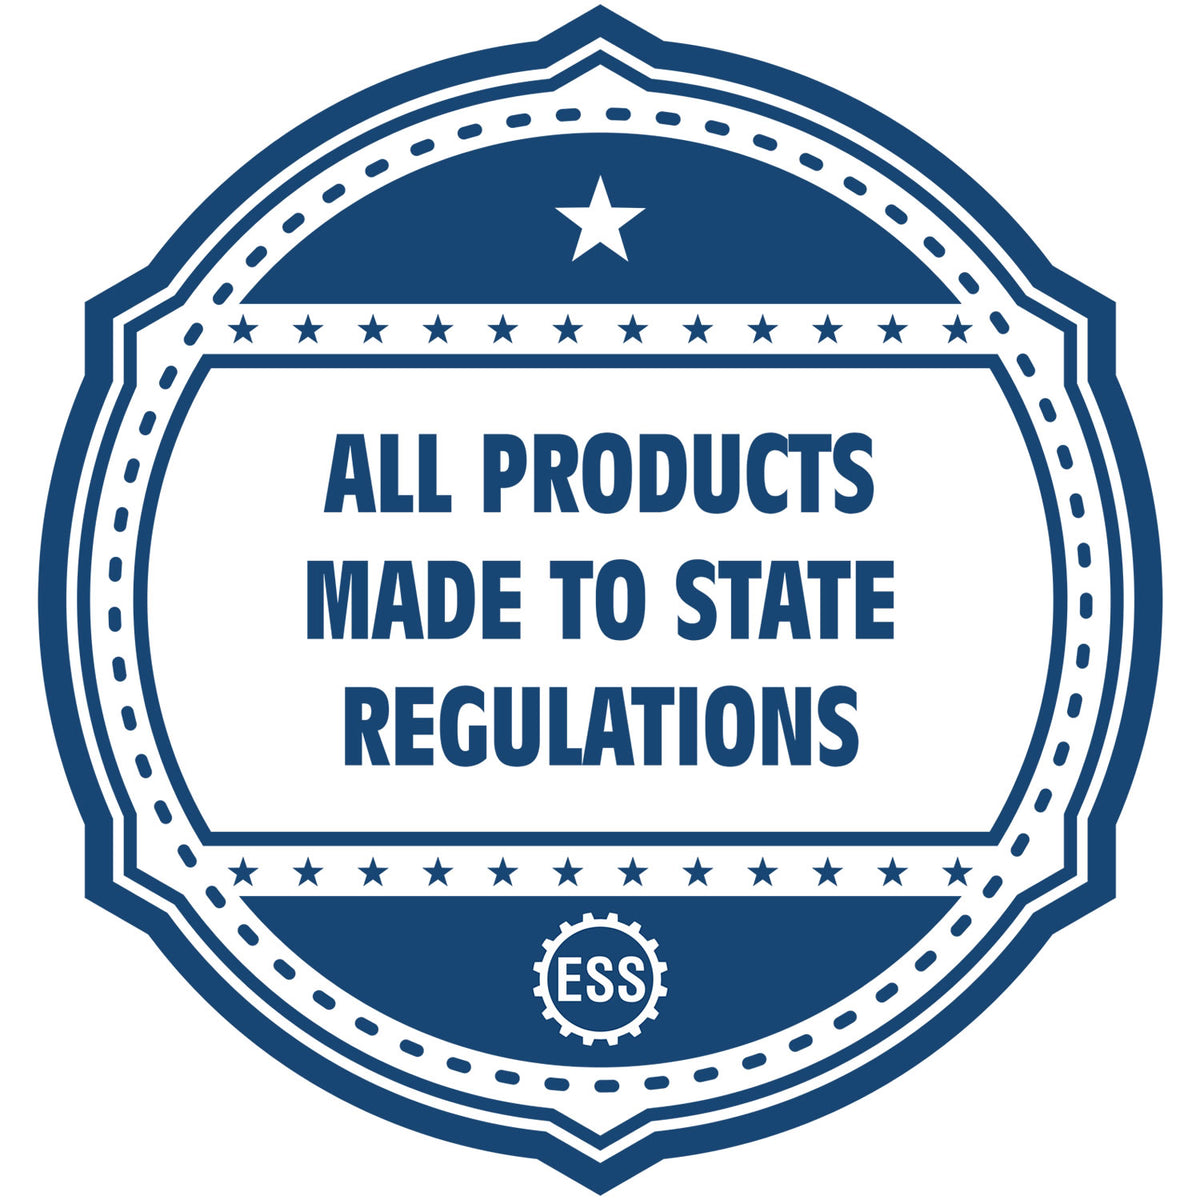 An icon or badge element for the South Carolina Landscape Architectural Seal Stamp showing that this product is made in compliance with state regulations.